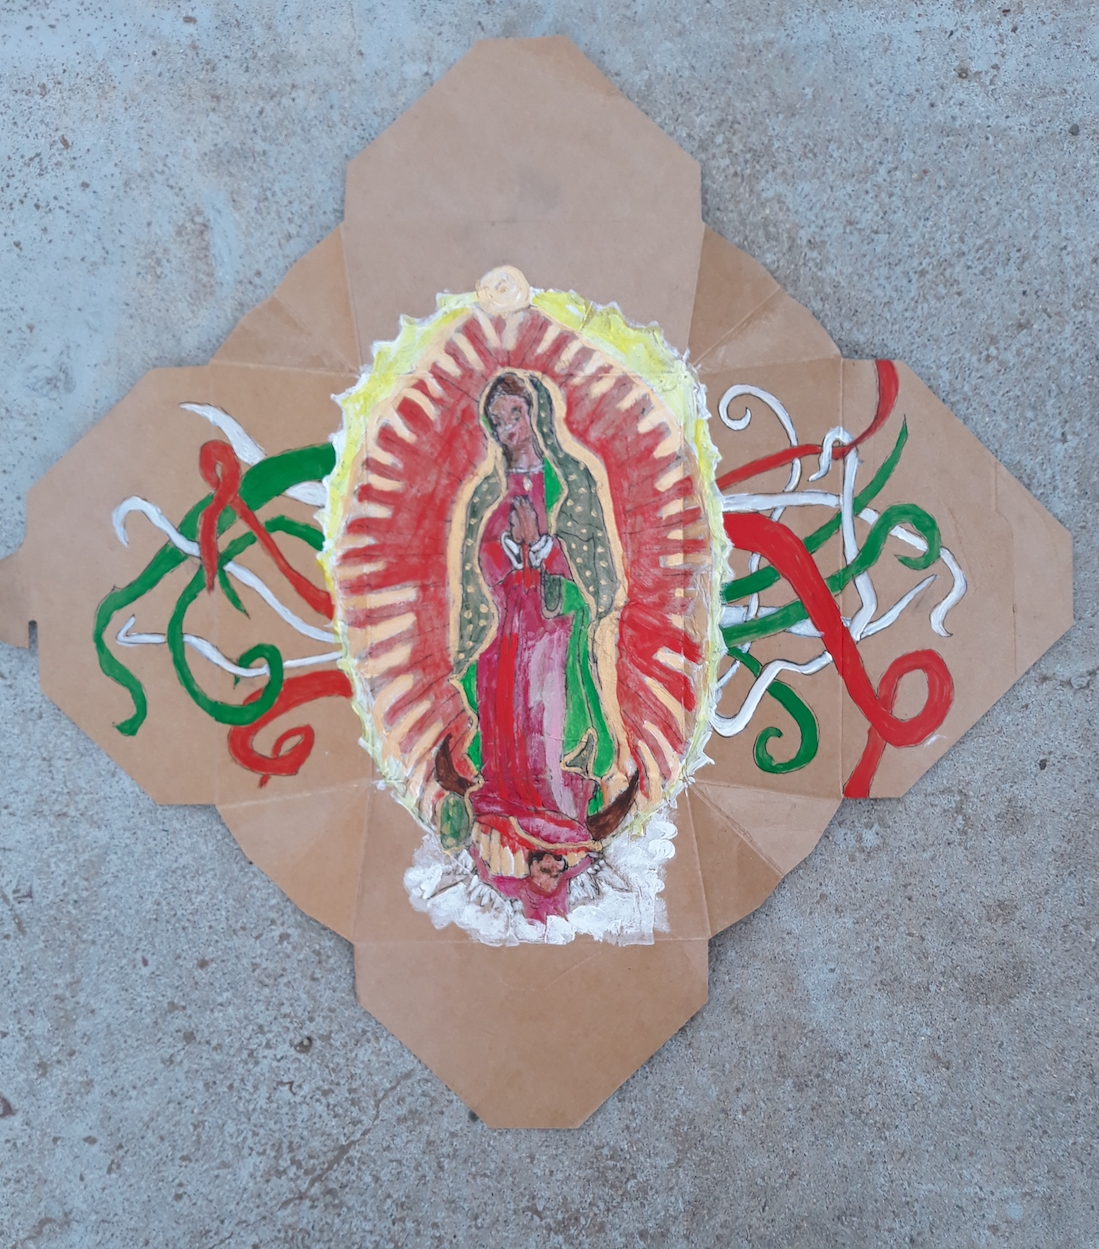 Polly Jackson - Guadalupe Virgin # 3 in a Take-Out Box